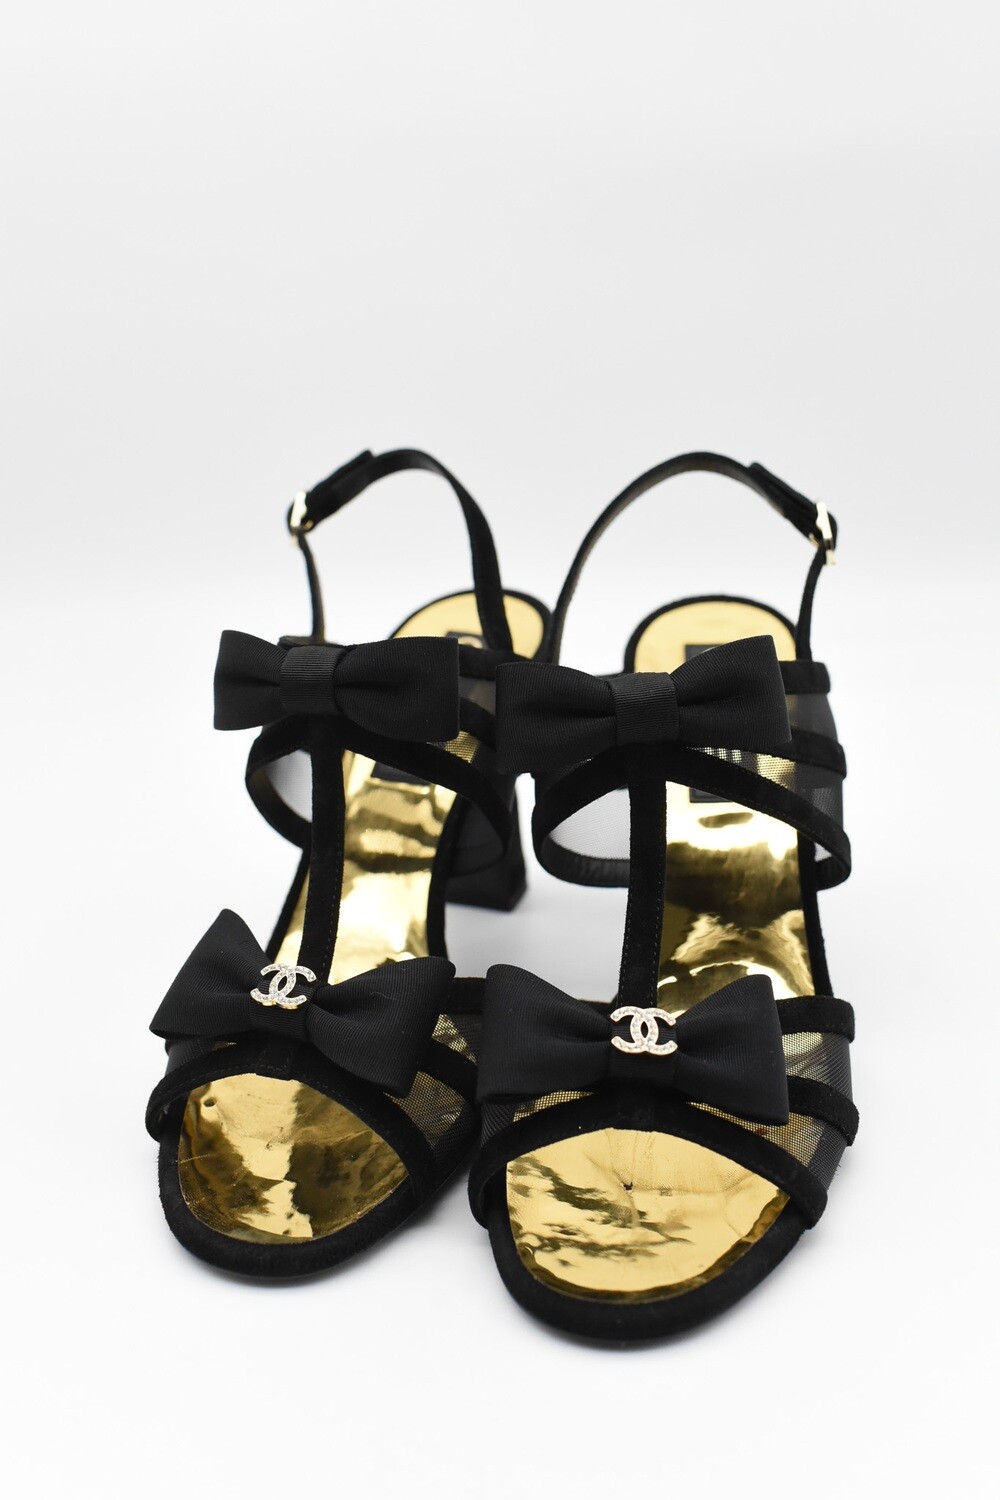 Chanel Shoes, Black Mesh Heels with Bows, Size 39.5, Preowned in